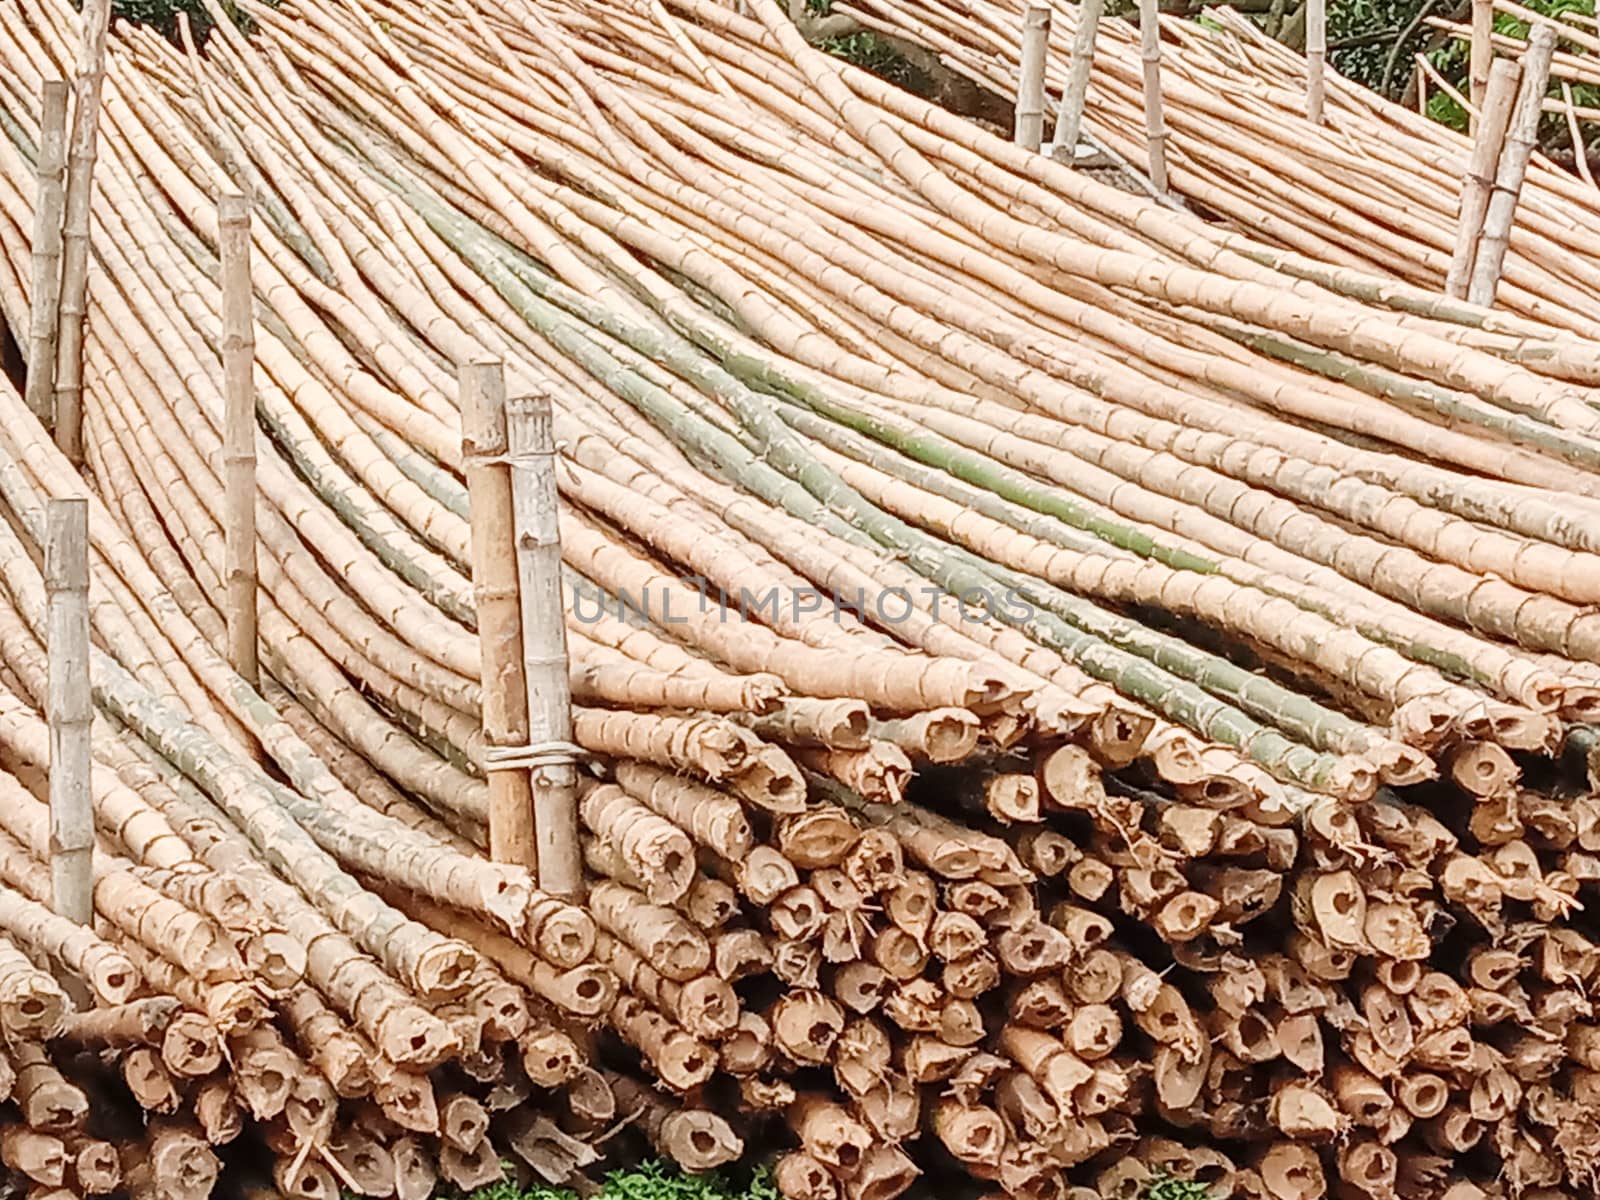 bamboo stock on bamboo market for sell